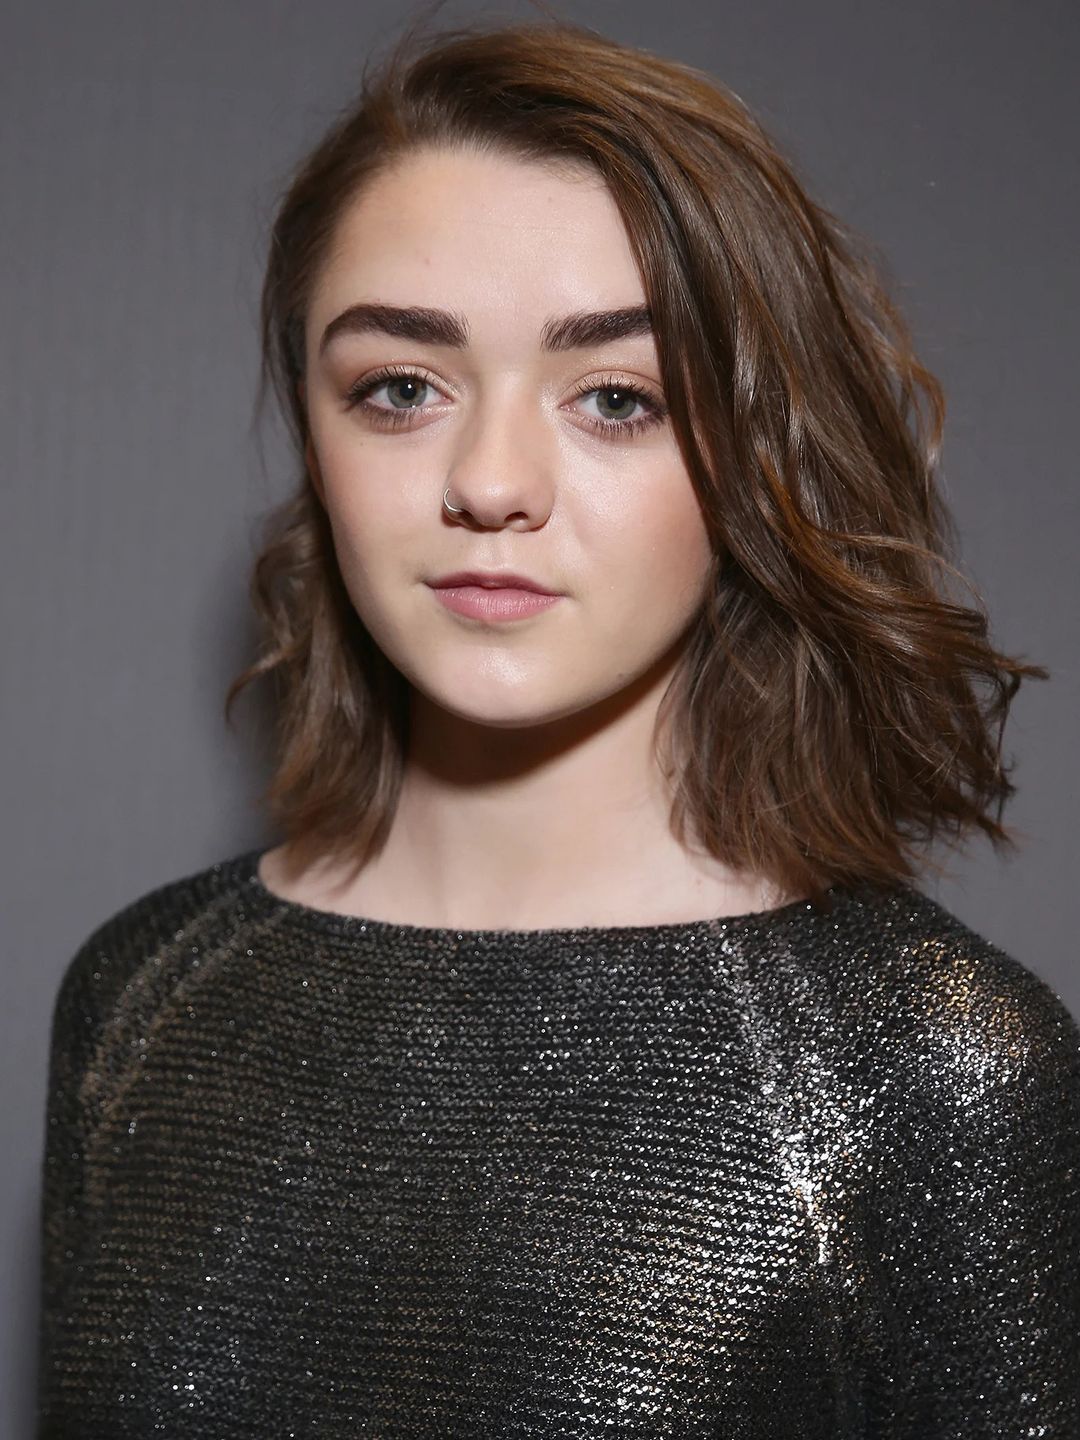 Maisie Williams story of success